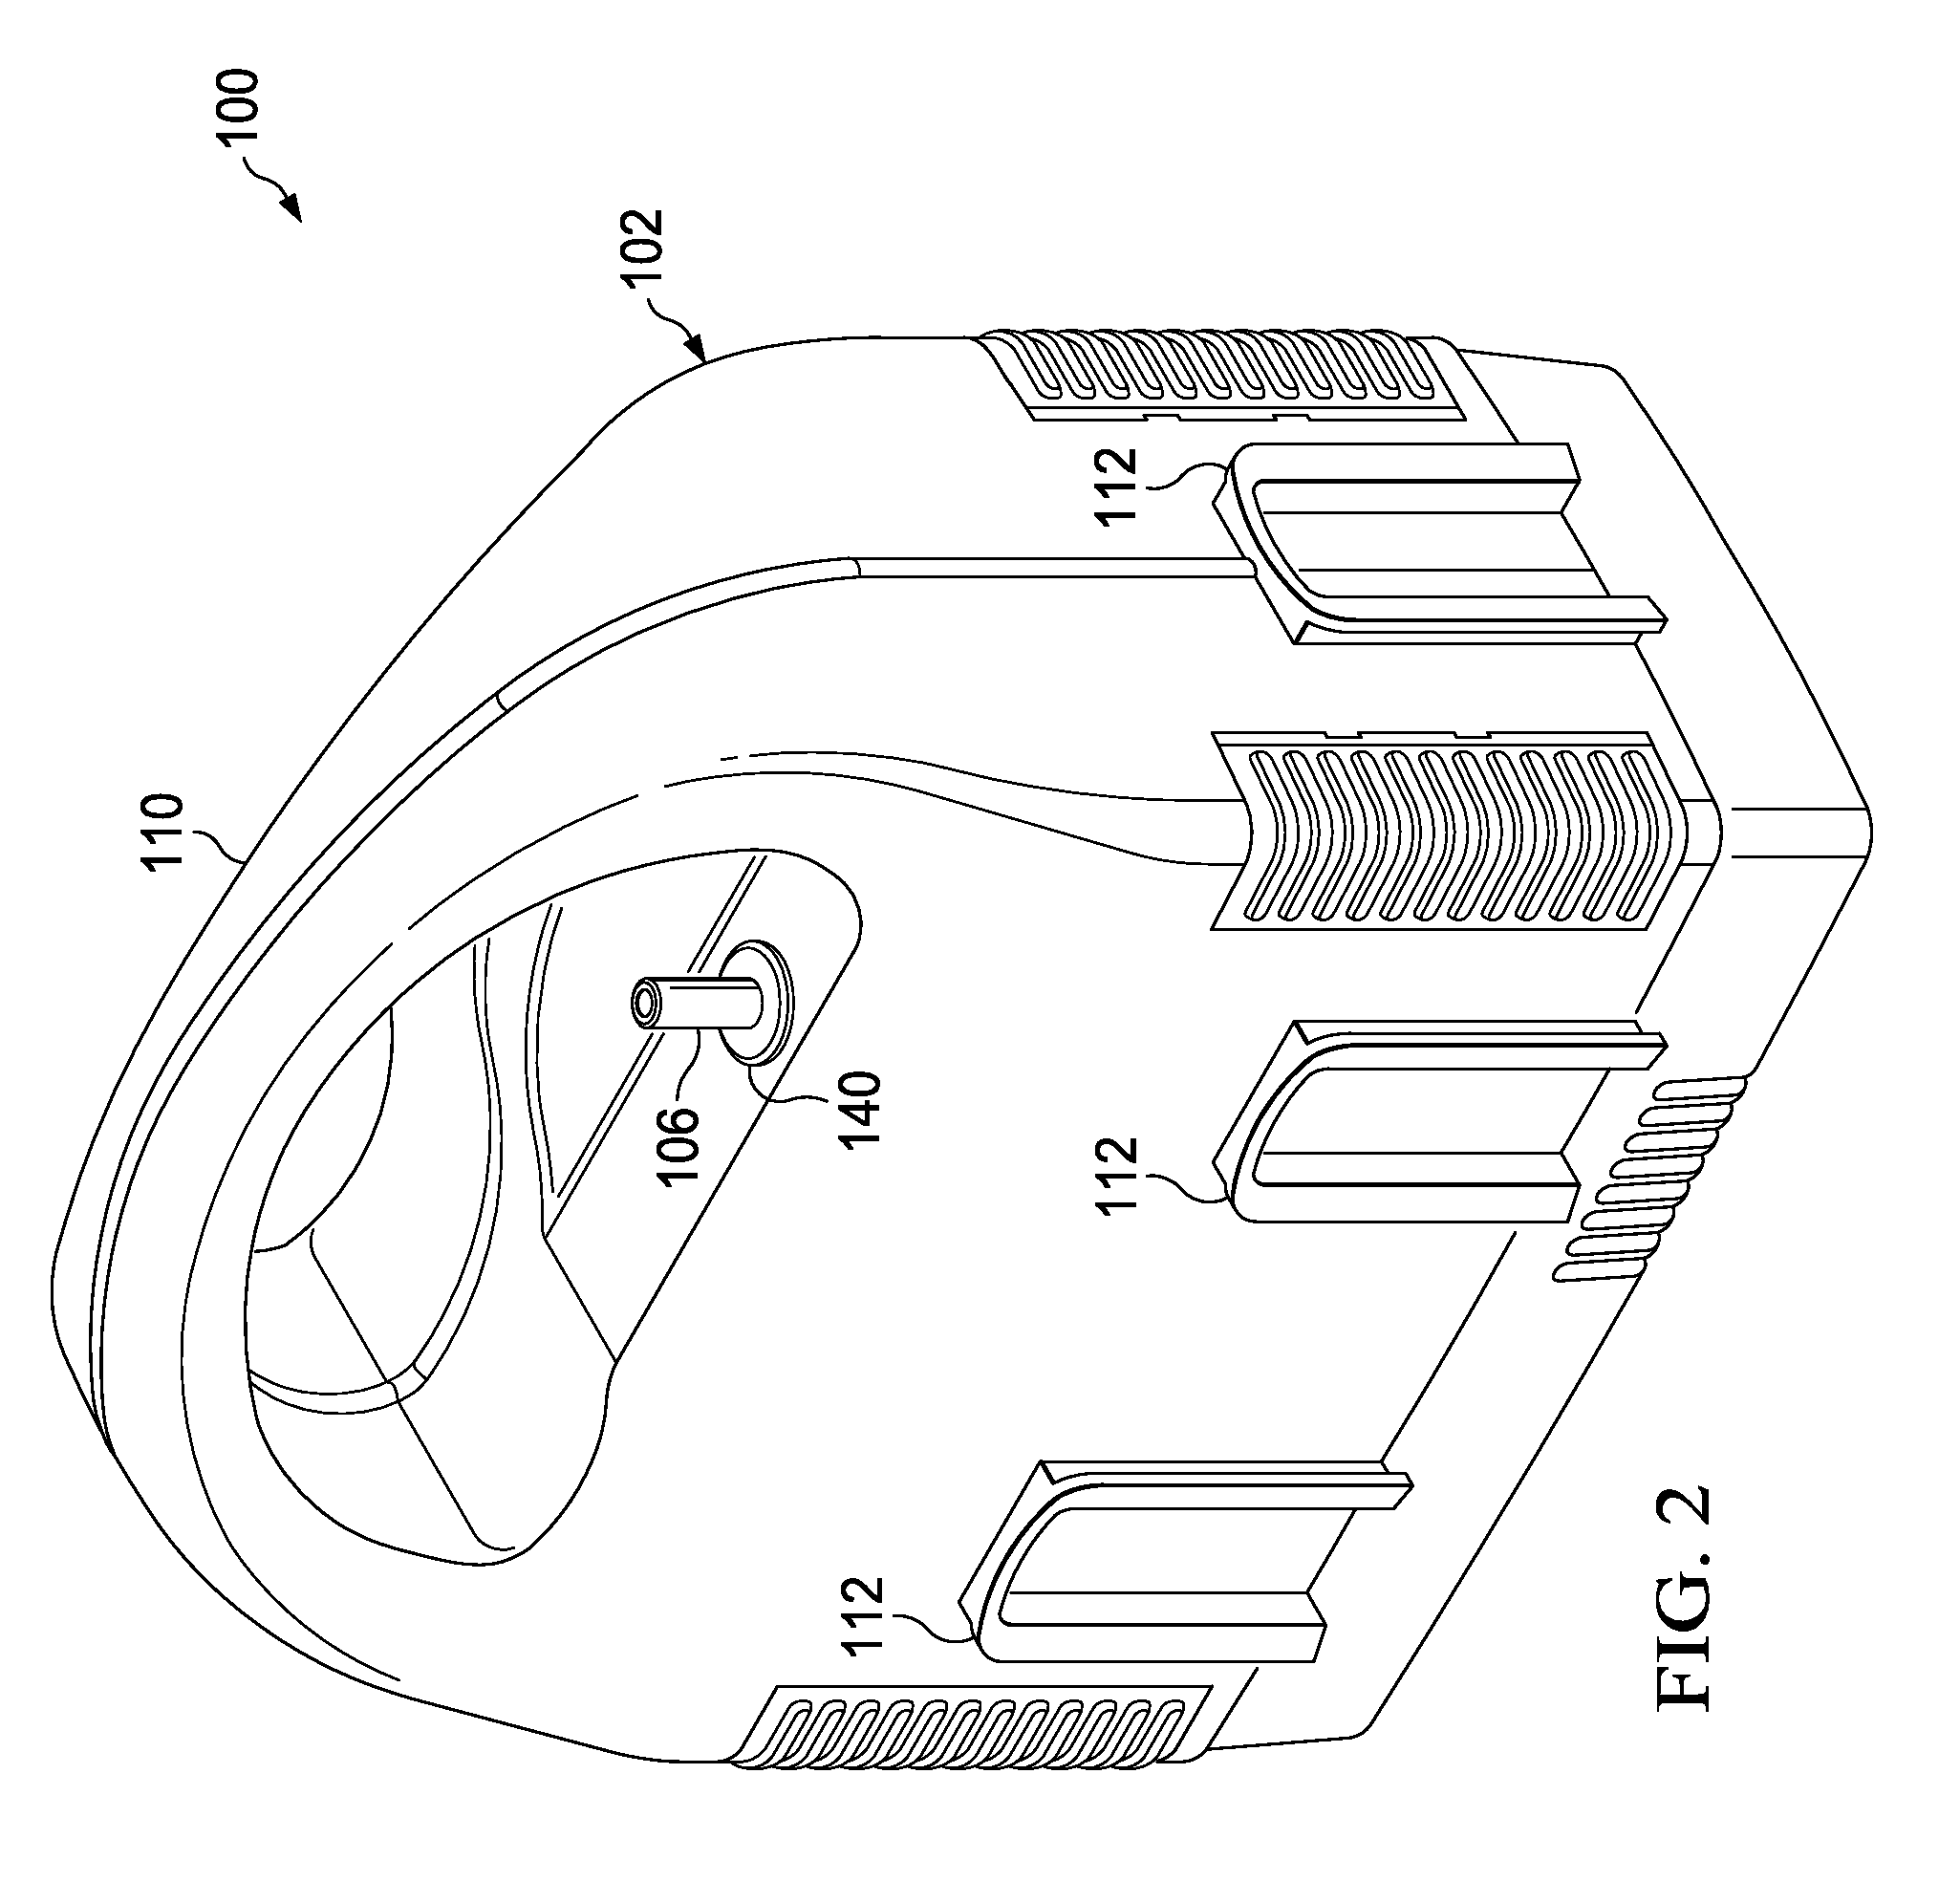 System, Method, and Pump to Prevent Pump Contamination During Negative Pressure Wound Therapy